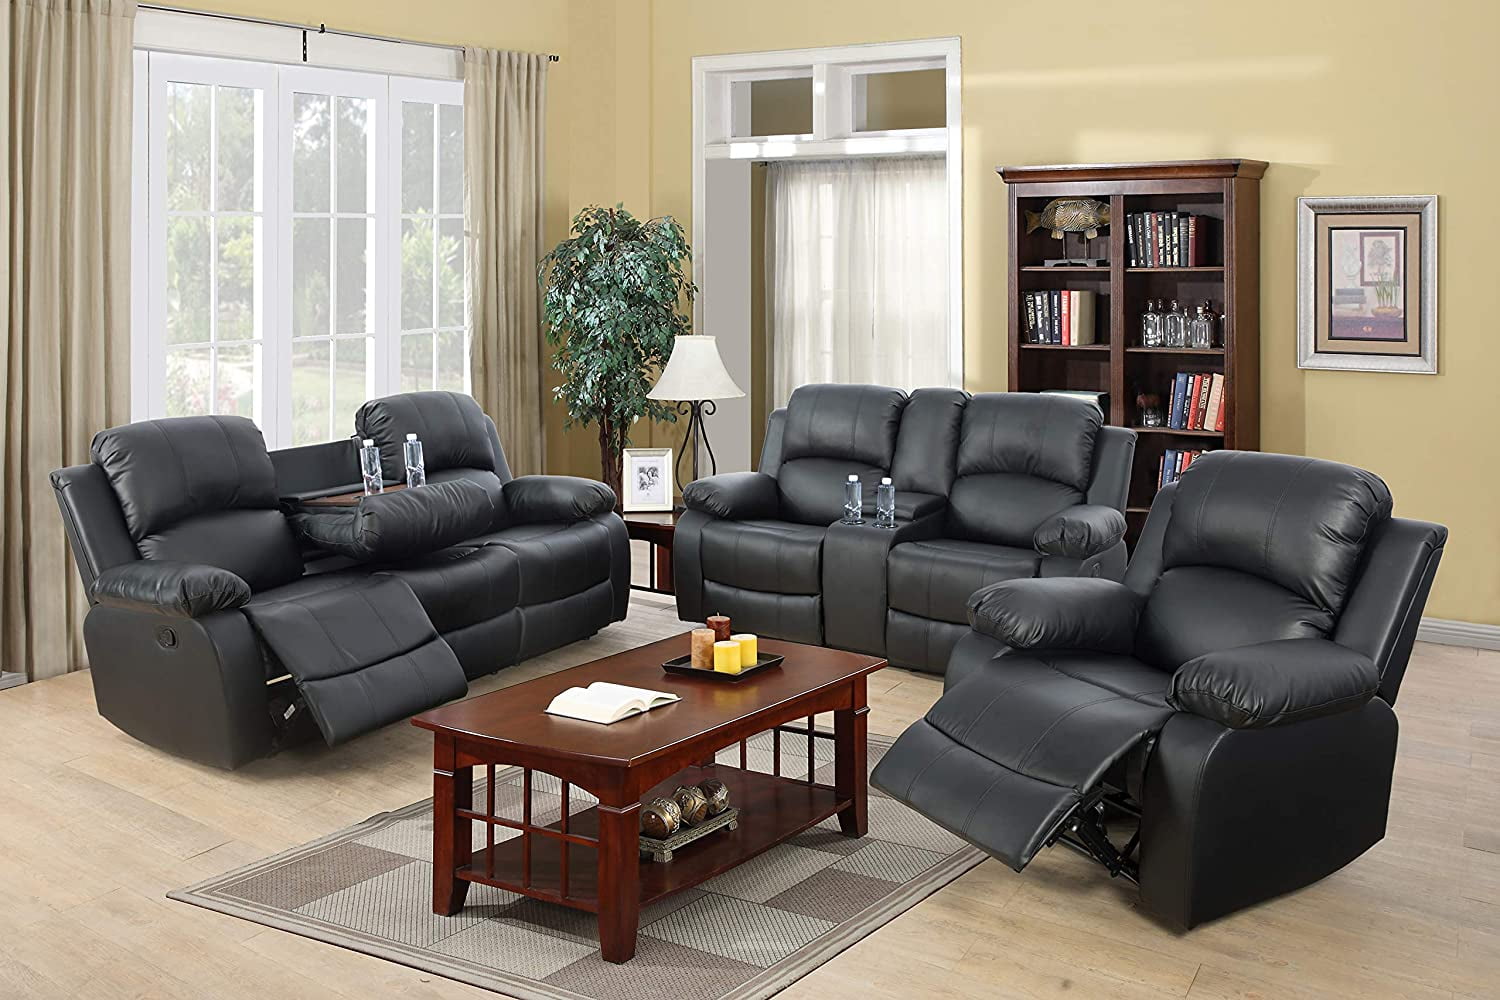 Pieces Living Room Reclining Sofa Sets, 3 Piece Reclining Leather Sofa Set